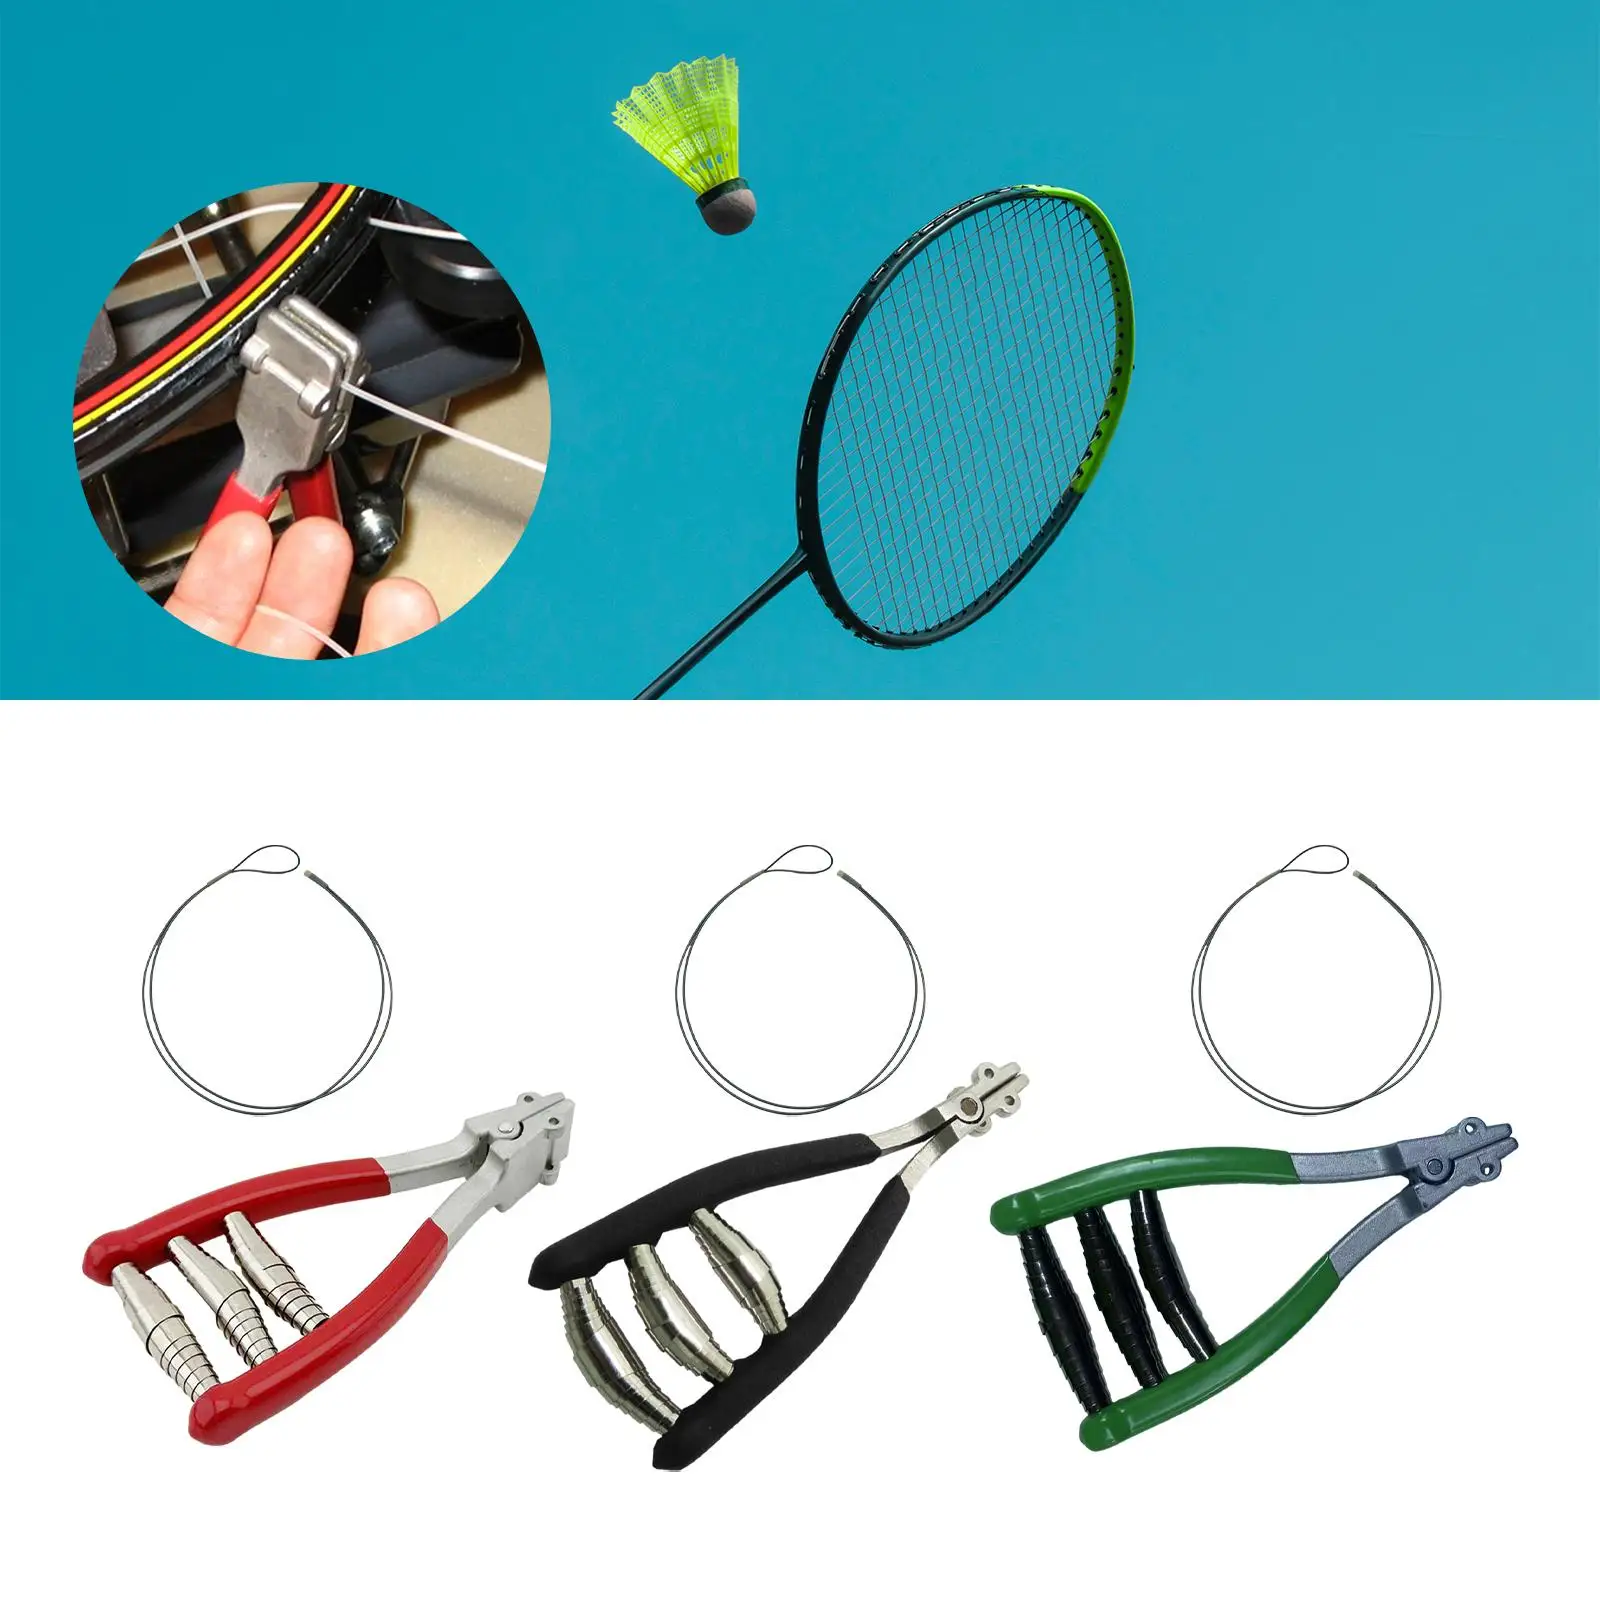 Sports Starting Clamp Badminton Starting Stringing Clamp Tennis Equipment Clamping Tool for Tennis Badminton Squash Accessories